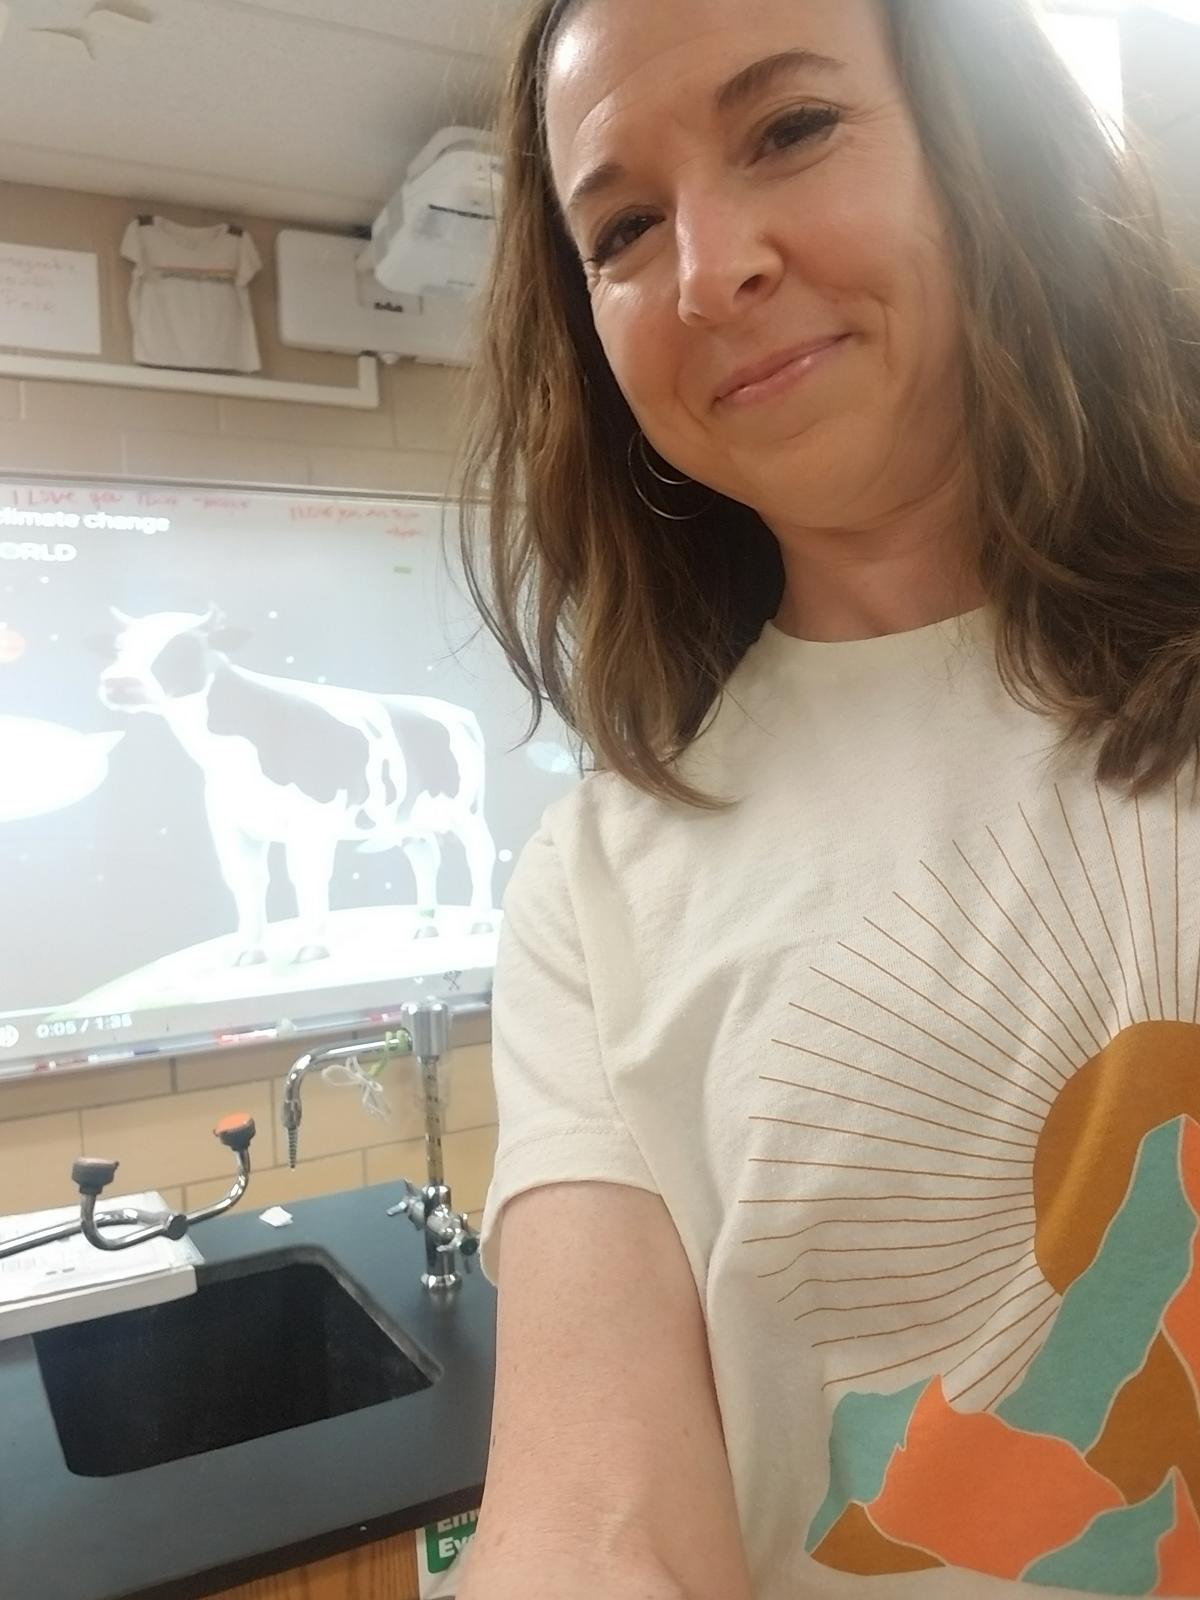 Mandy taught her students about Earth Day